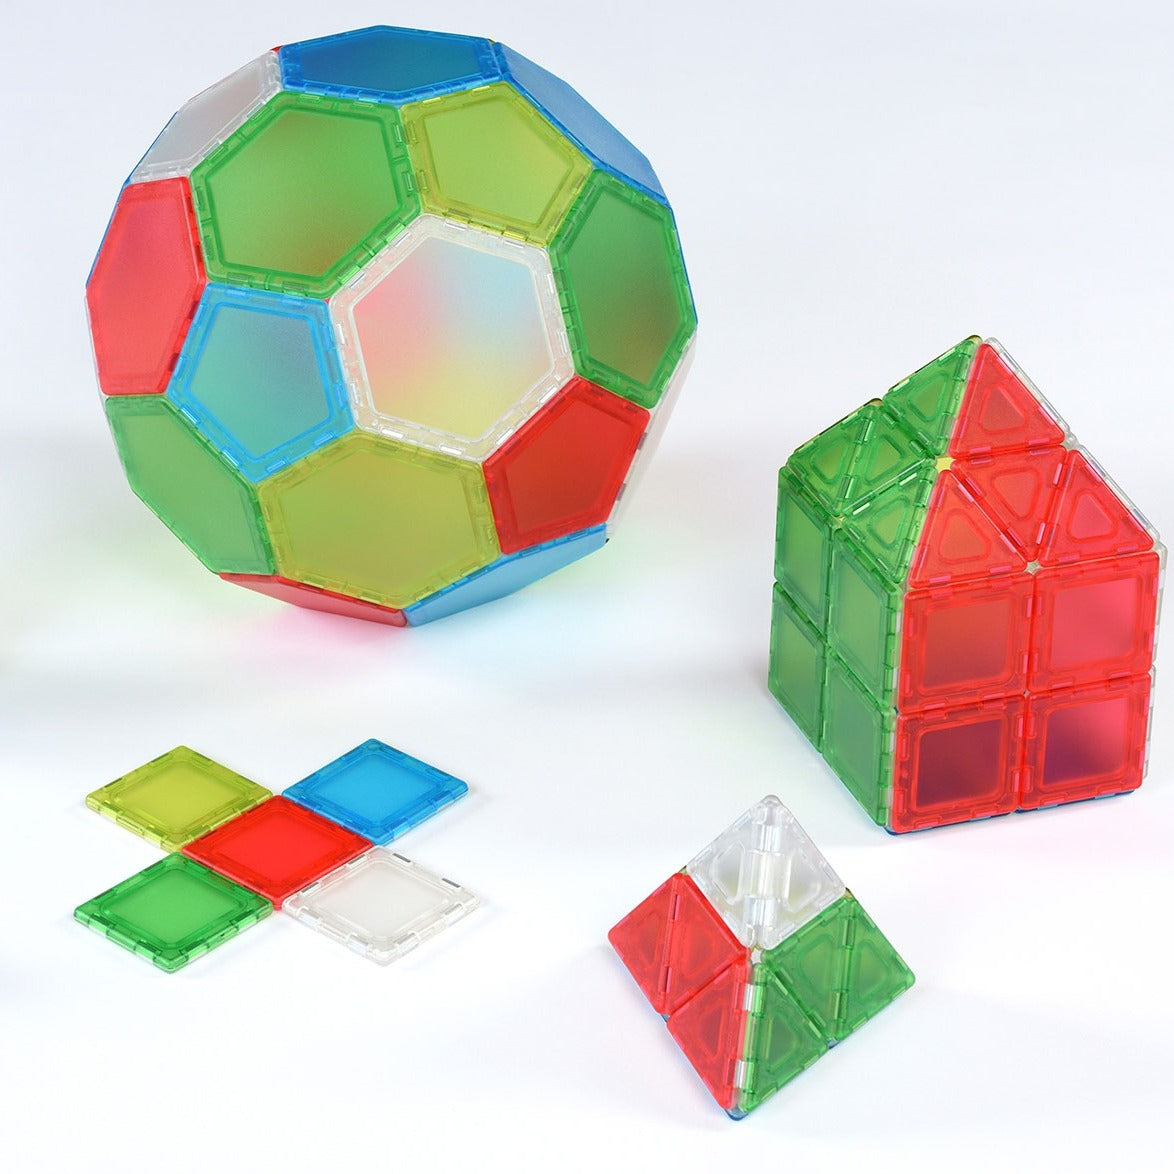 Translucent Solid Magnetic Polydron Essential Shapes Set, Introduce a new dimension of creativity and learning with the Translucent Solid Magnetic Polydron Essential Shapes Set. With 104 pieces, including squares, equilateral triangles, pentagons, and hexagons, this set is perfect for building more complex shapes and teaching geometry, construction, and polarity to larger groups of children.These translucent pieces are supplied in five appealing colors, adding a captivating visual element to creations. The 